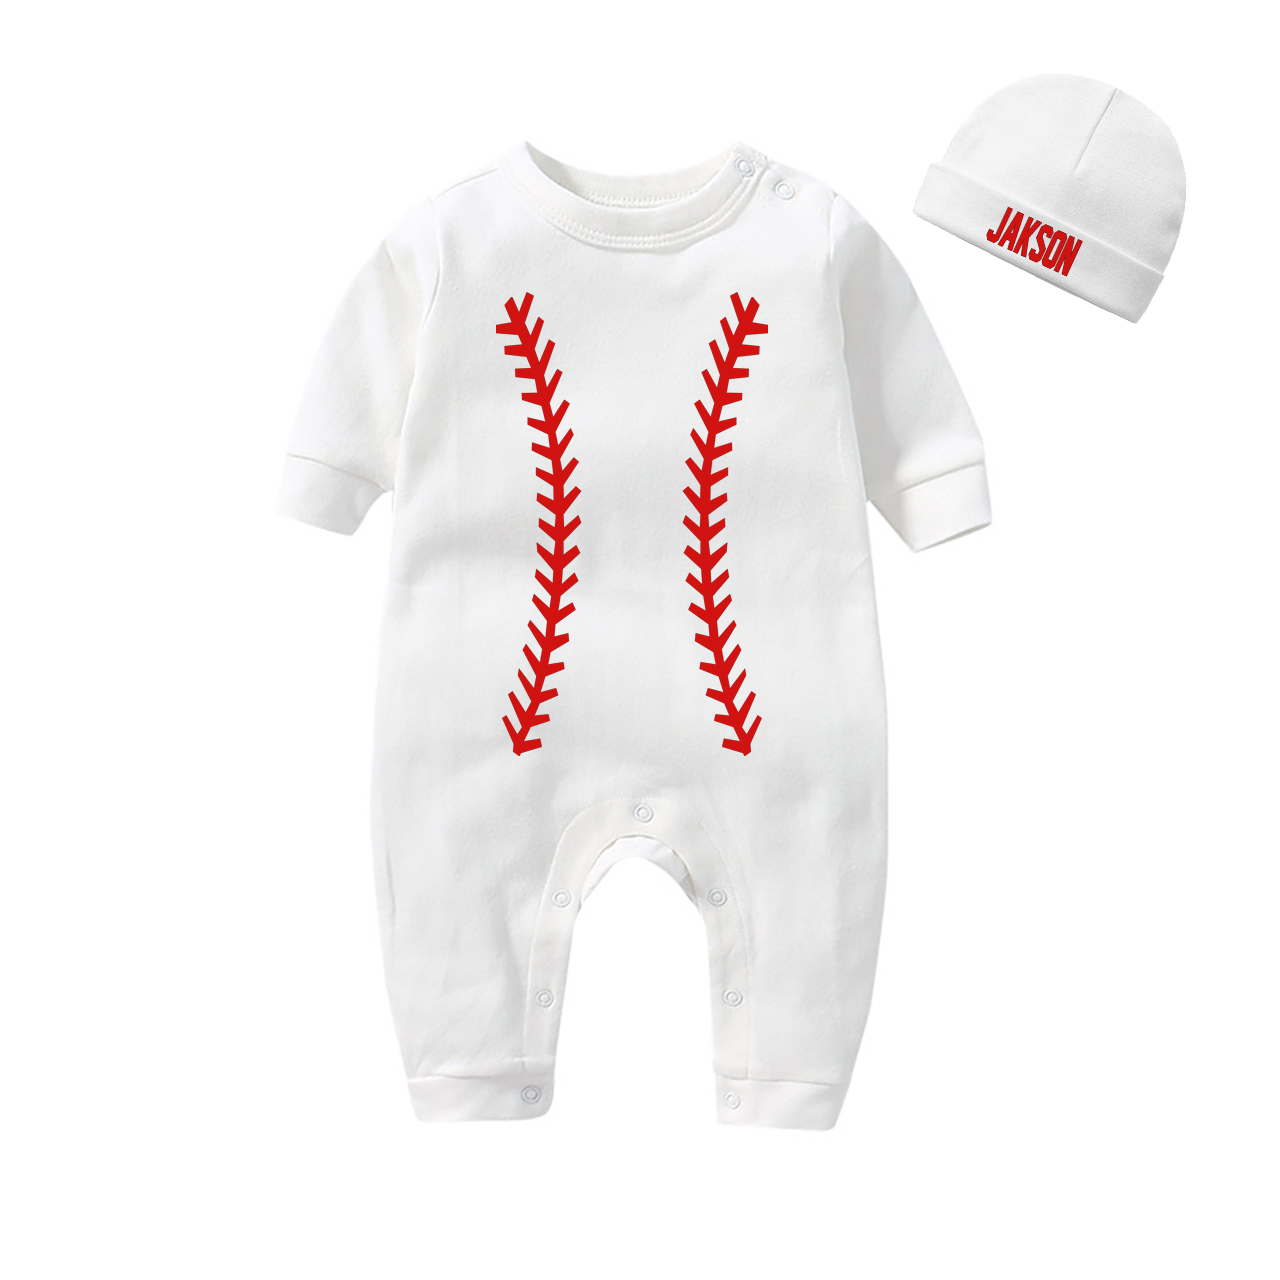 Baseball Personalized Baby Rompers Set